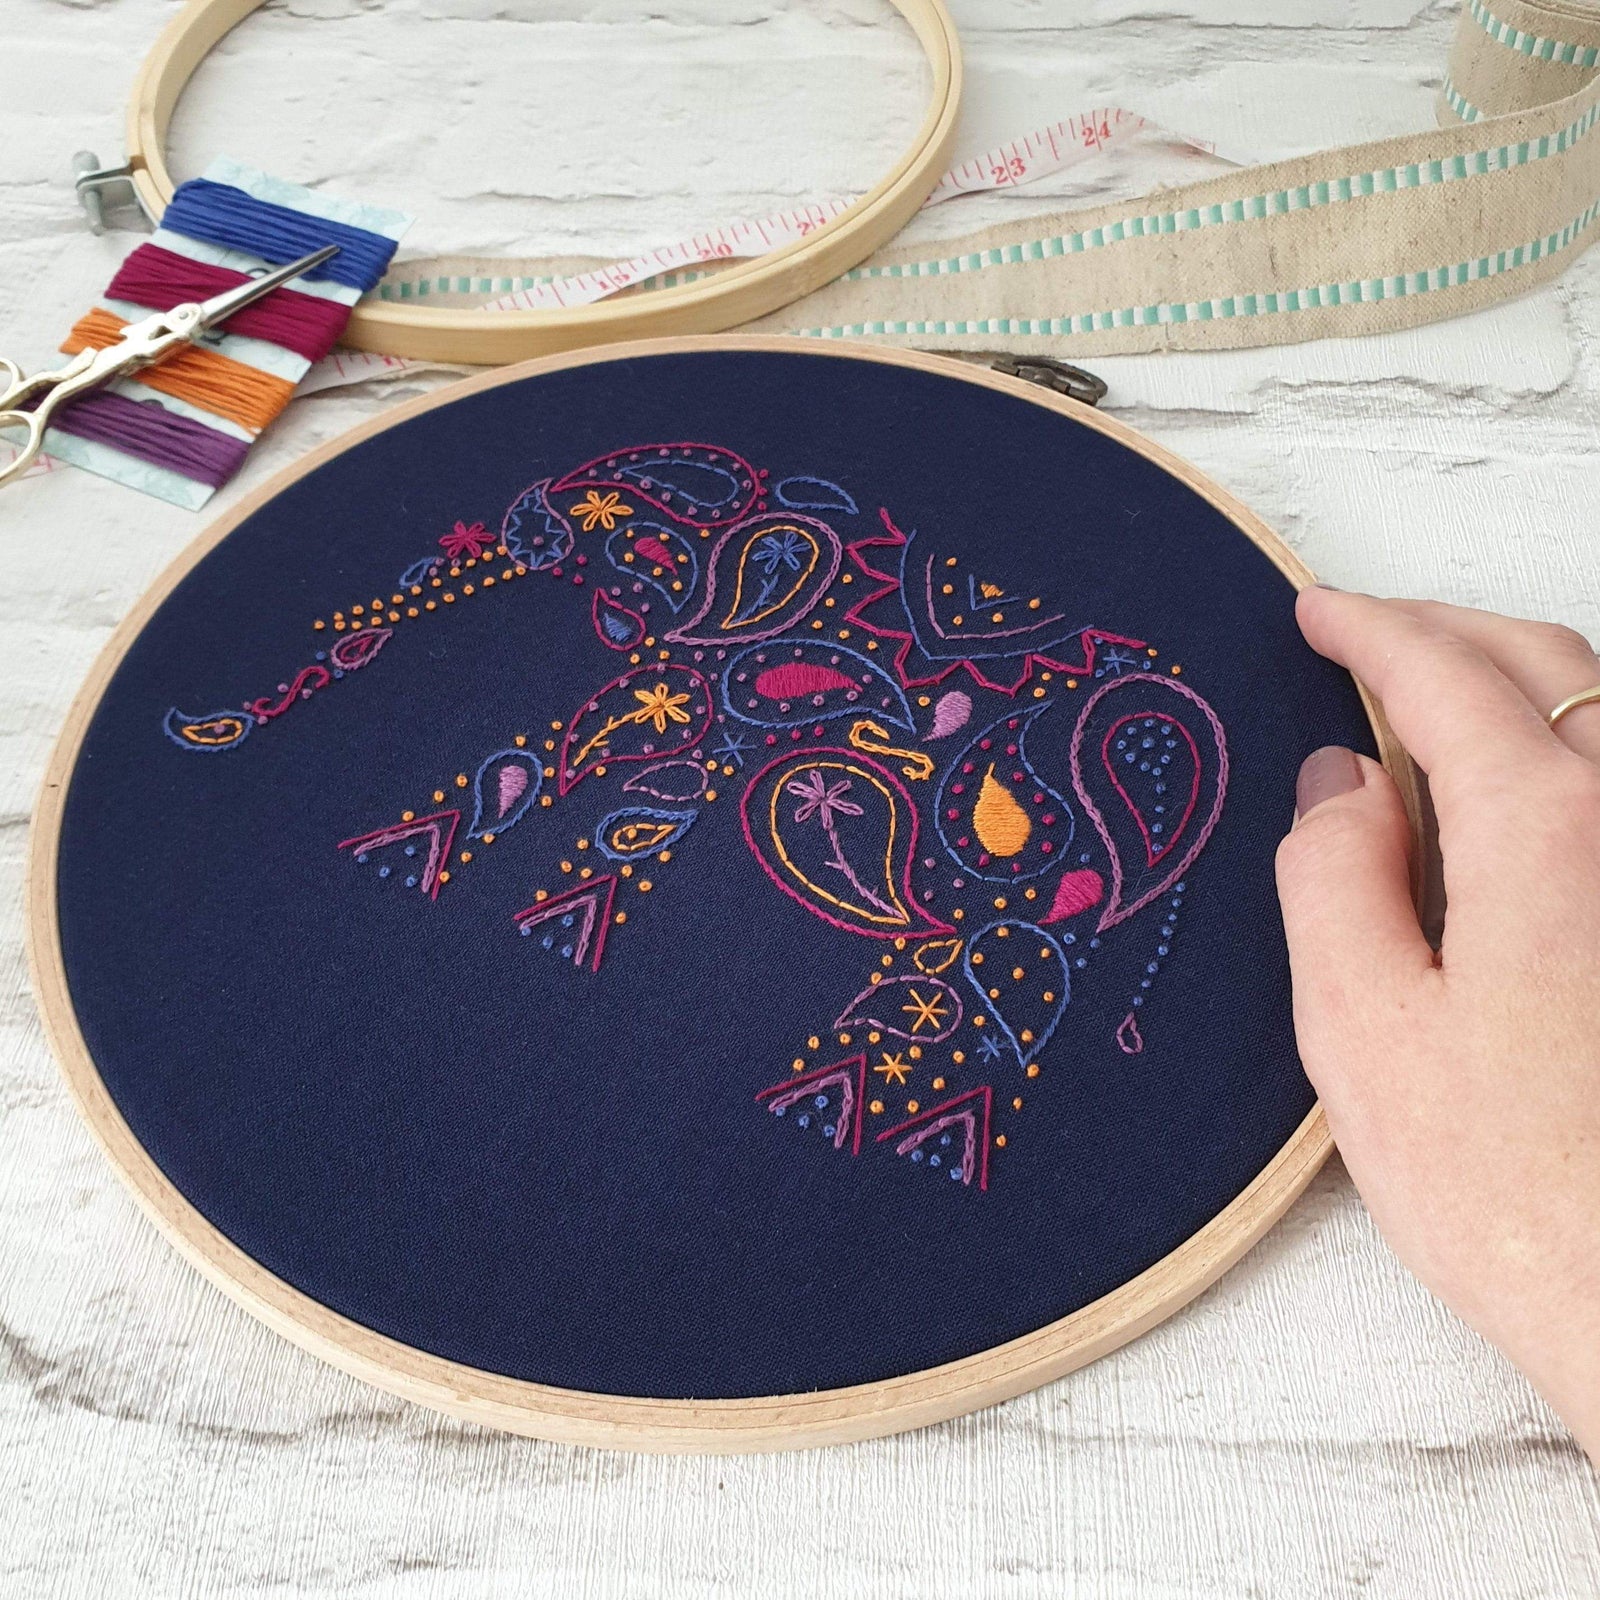 Embroidery Tools: This Week on My Table –